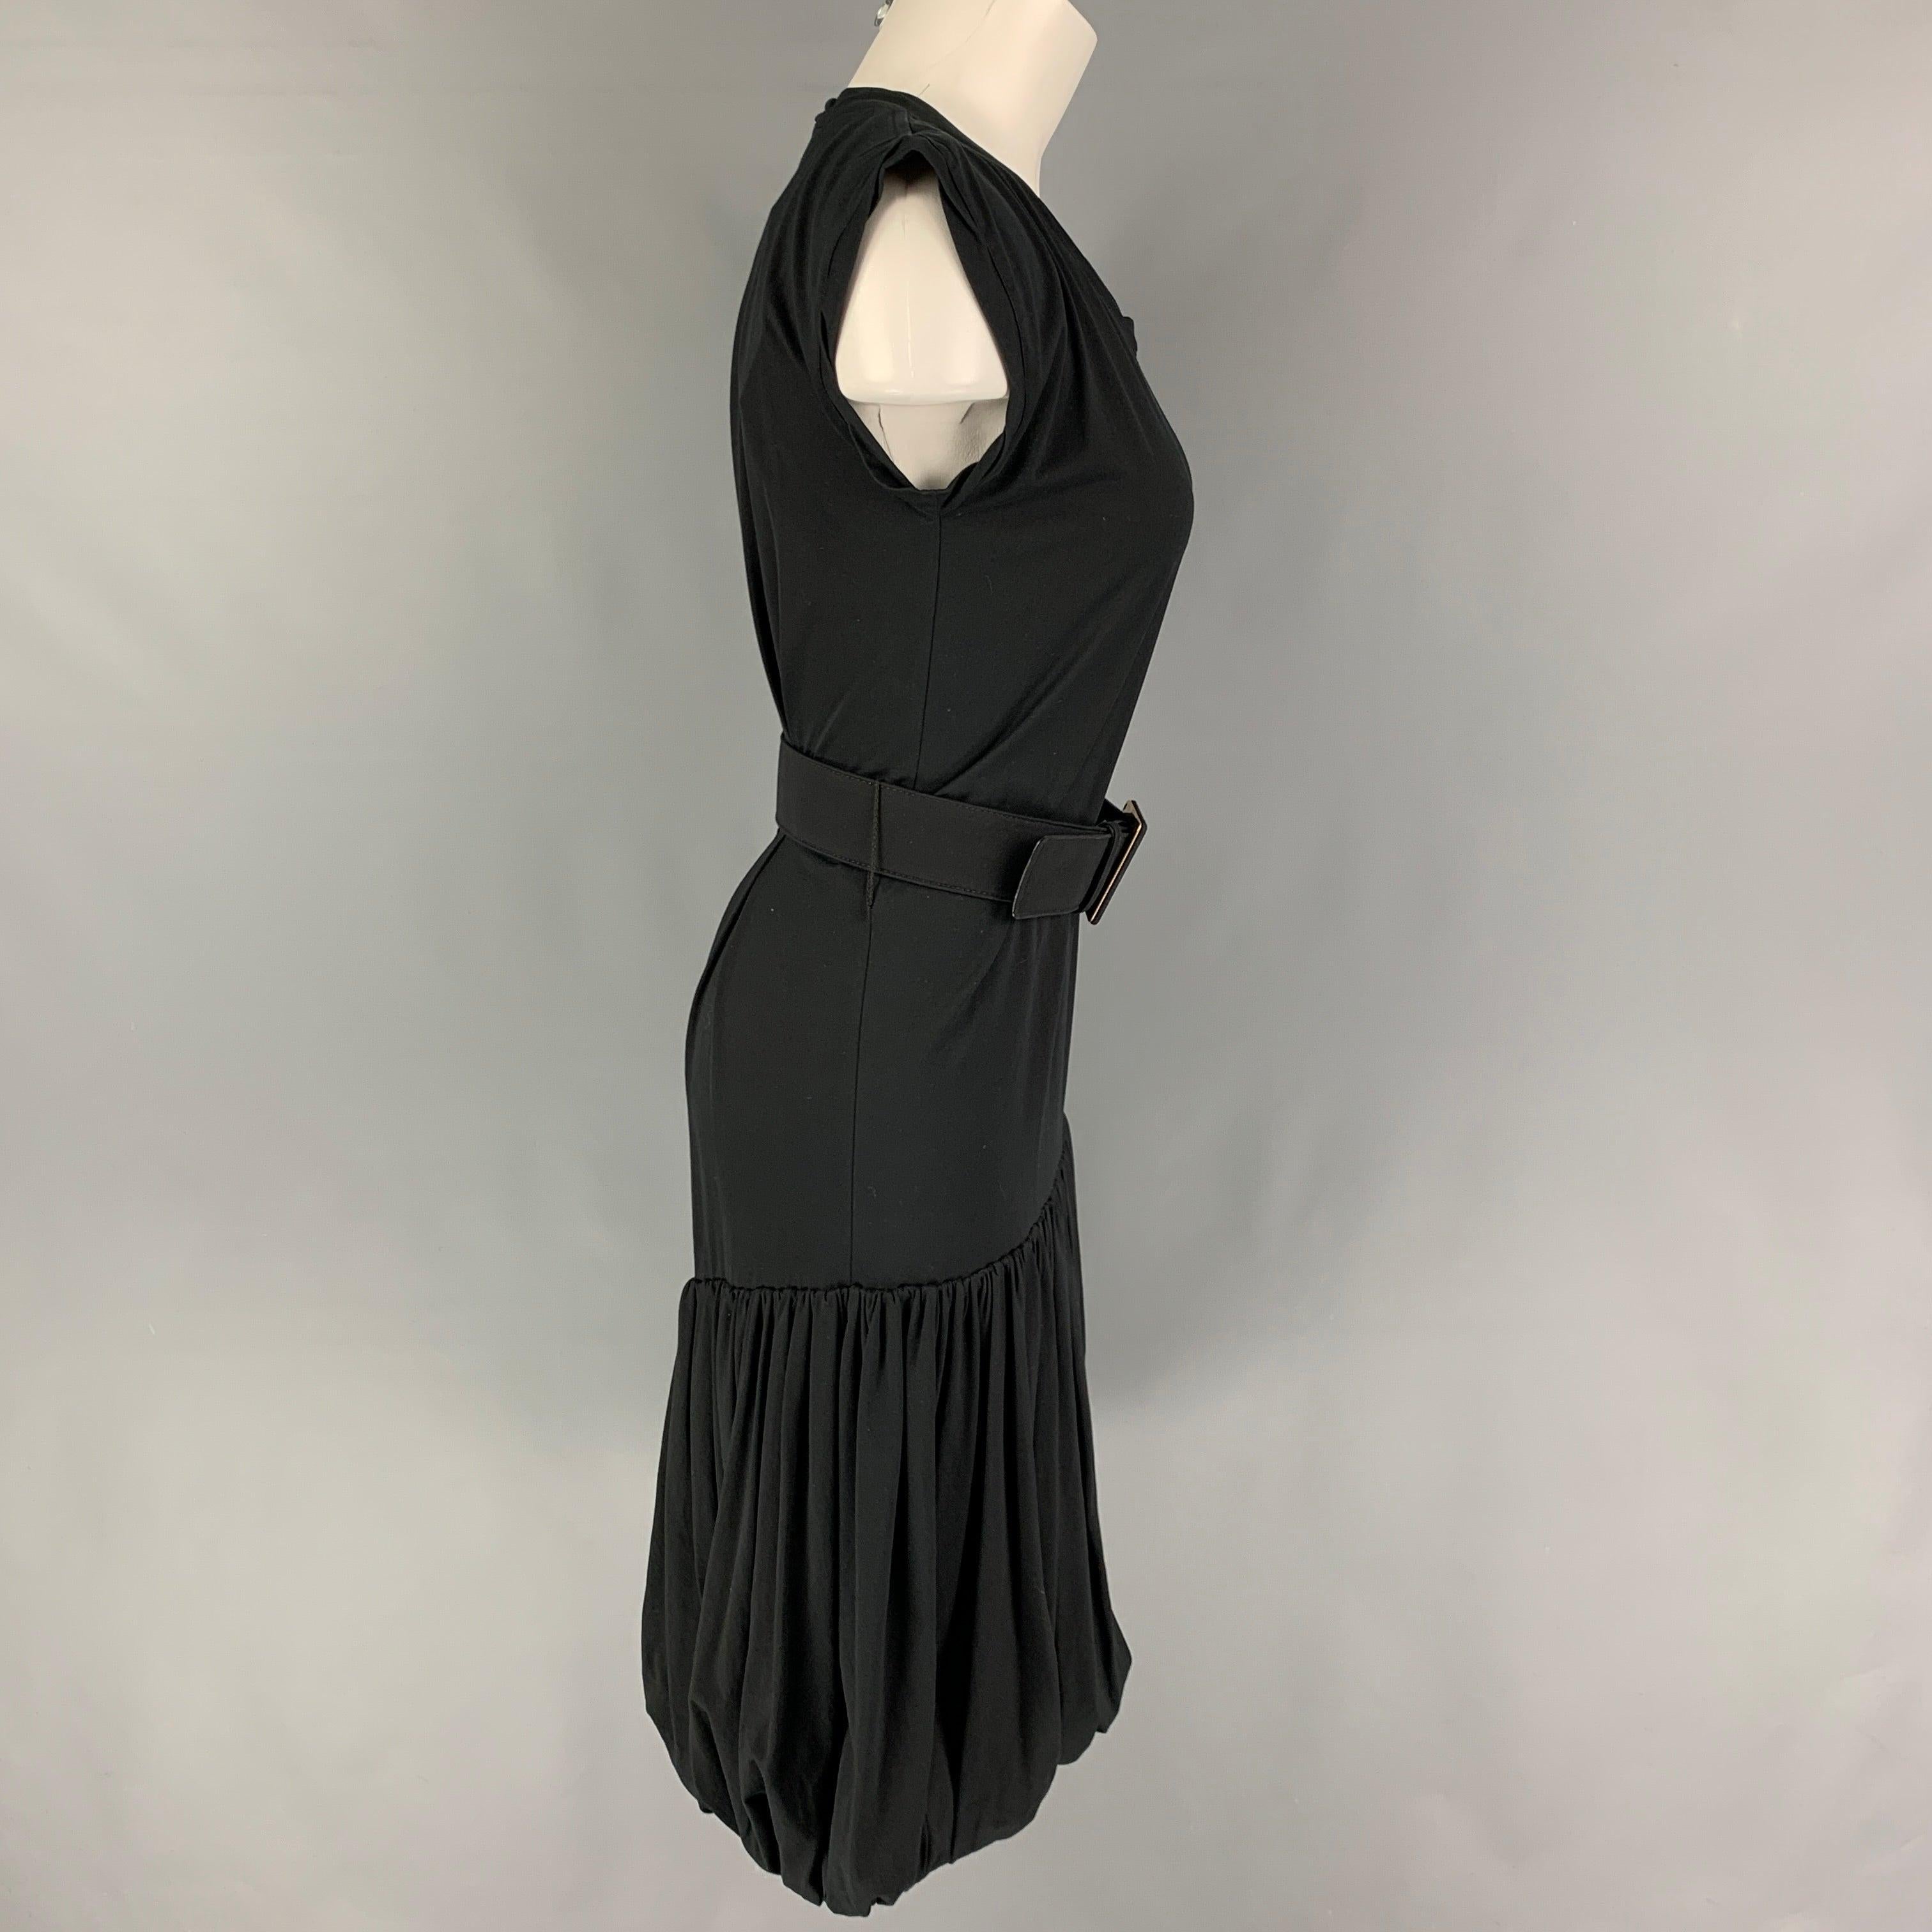 YVES SAINT LAURENT dress comes in a black cotton featuring a bubble hem, sleeveless, and a belt closure.
Very Good
Pre-Owned Condition. 

Marked:   S 

Measurements: 
 
Shoulder: 17.5 inches  Bust: 32 inches  Waist: 28 inches  Hip: 32 inches 